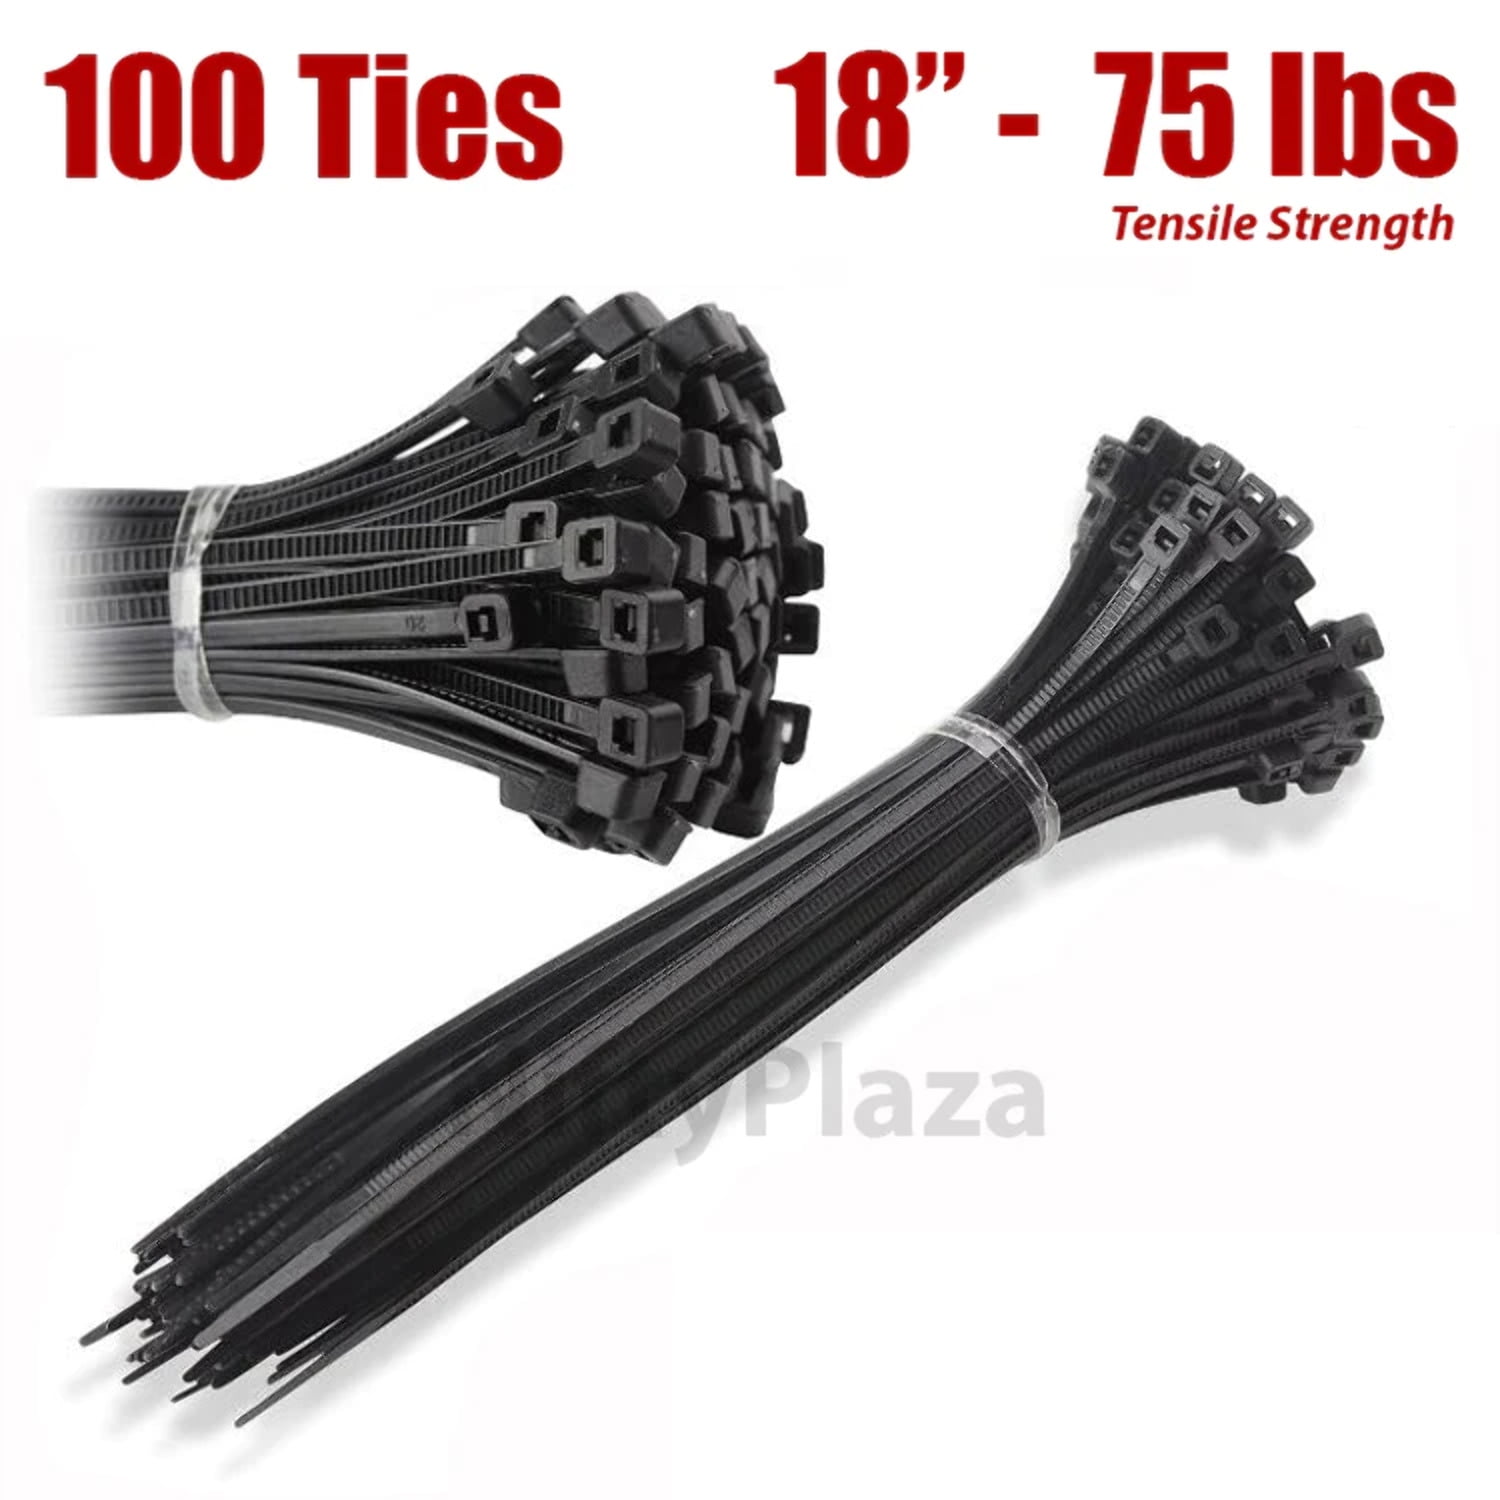 NiftyPlaza 18 Inch Cable Zip Ties - 100 Pack - 75 lbs TENSILE Strength ...